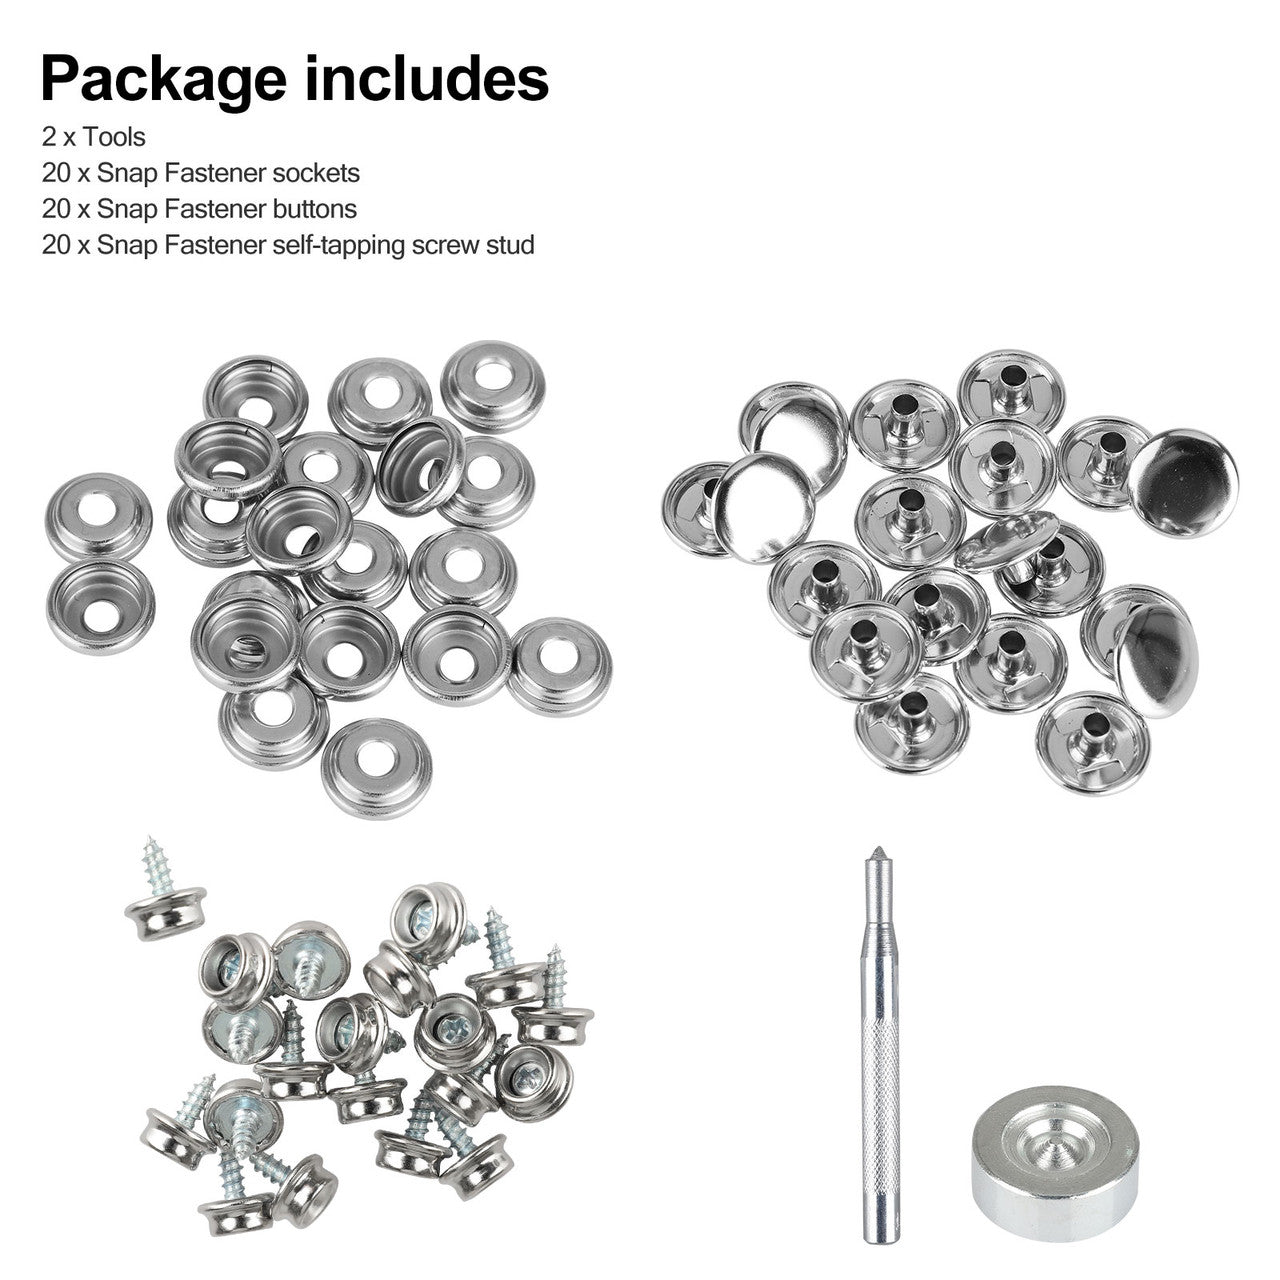 Leather Snap Fasteners Kit, 15mm Metal Button Snaps Press Studs with 2 Installation Tools, Snap Fastener Kit for Clothes, Jackets, Jeans Wears, Bracelets, Bags, 62Set